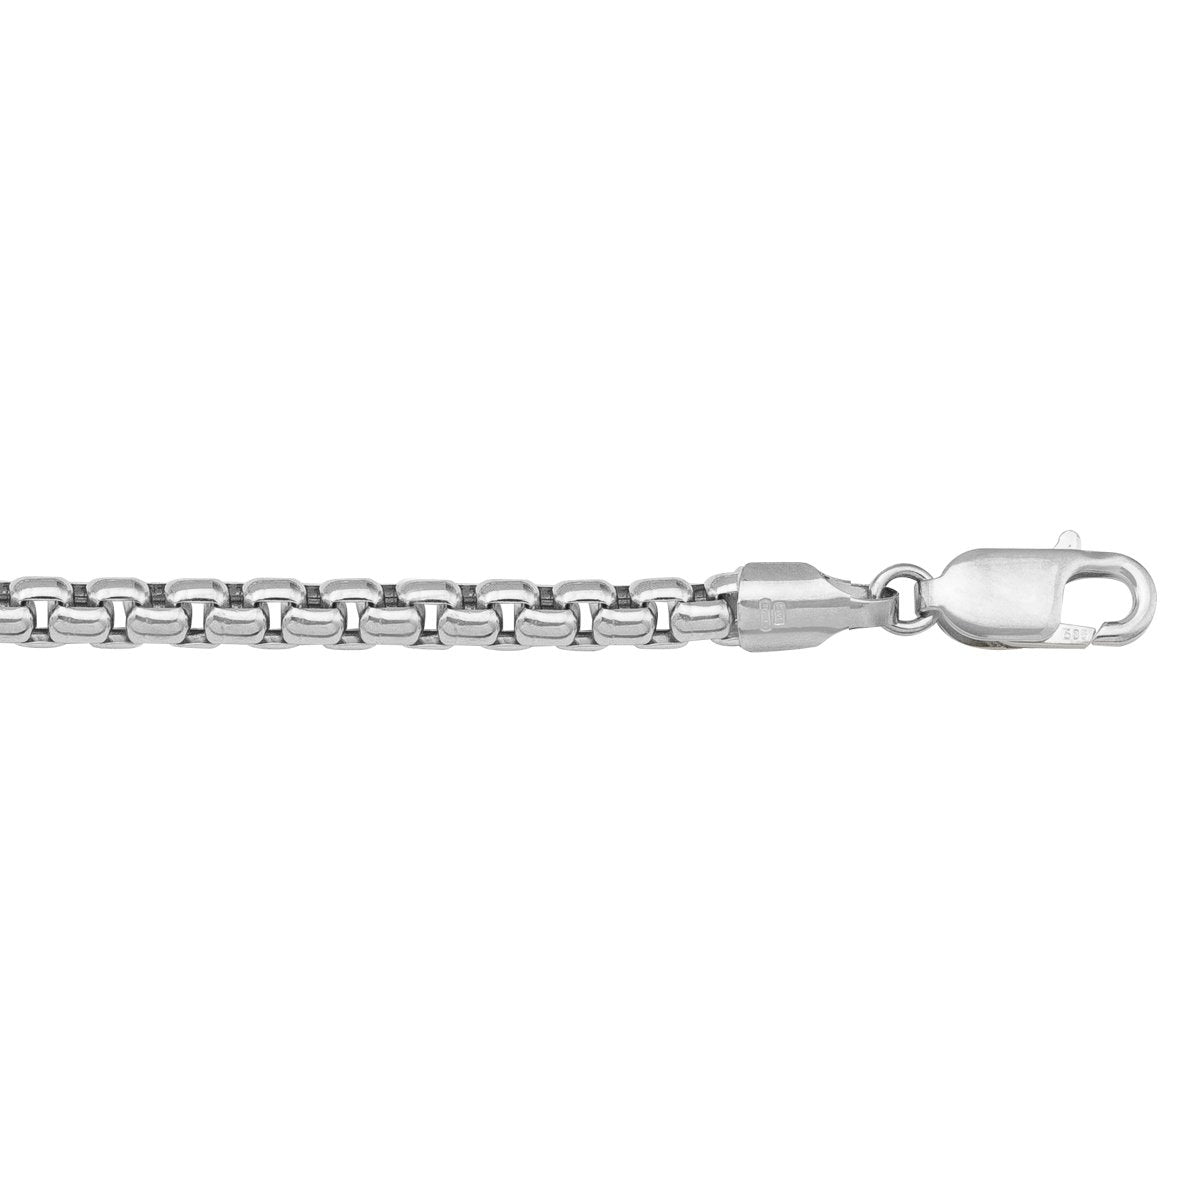 BRACELETS WHITE GOLD HOLLOW BOX LINK (LOBSTER CLASP) CHAIN